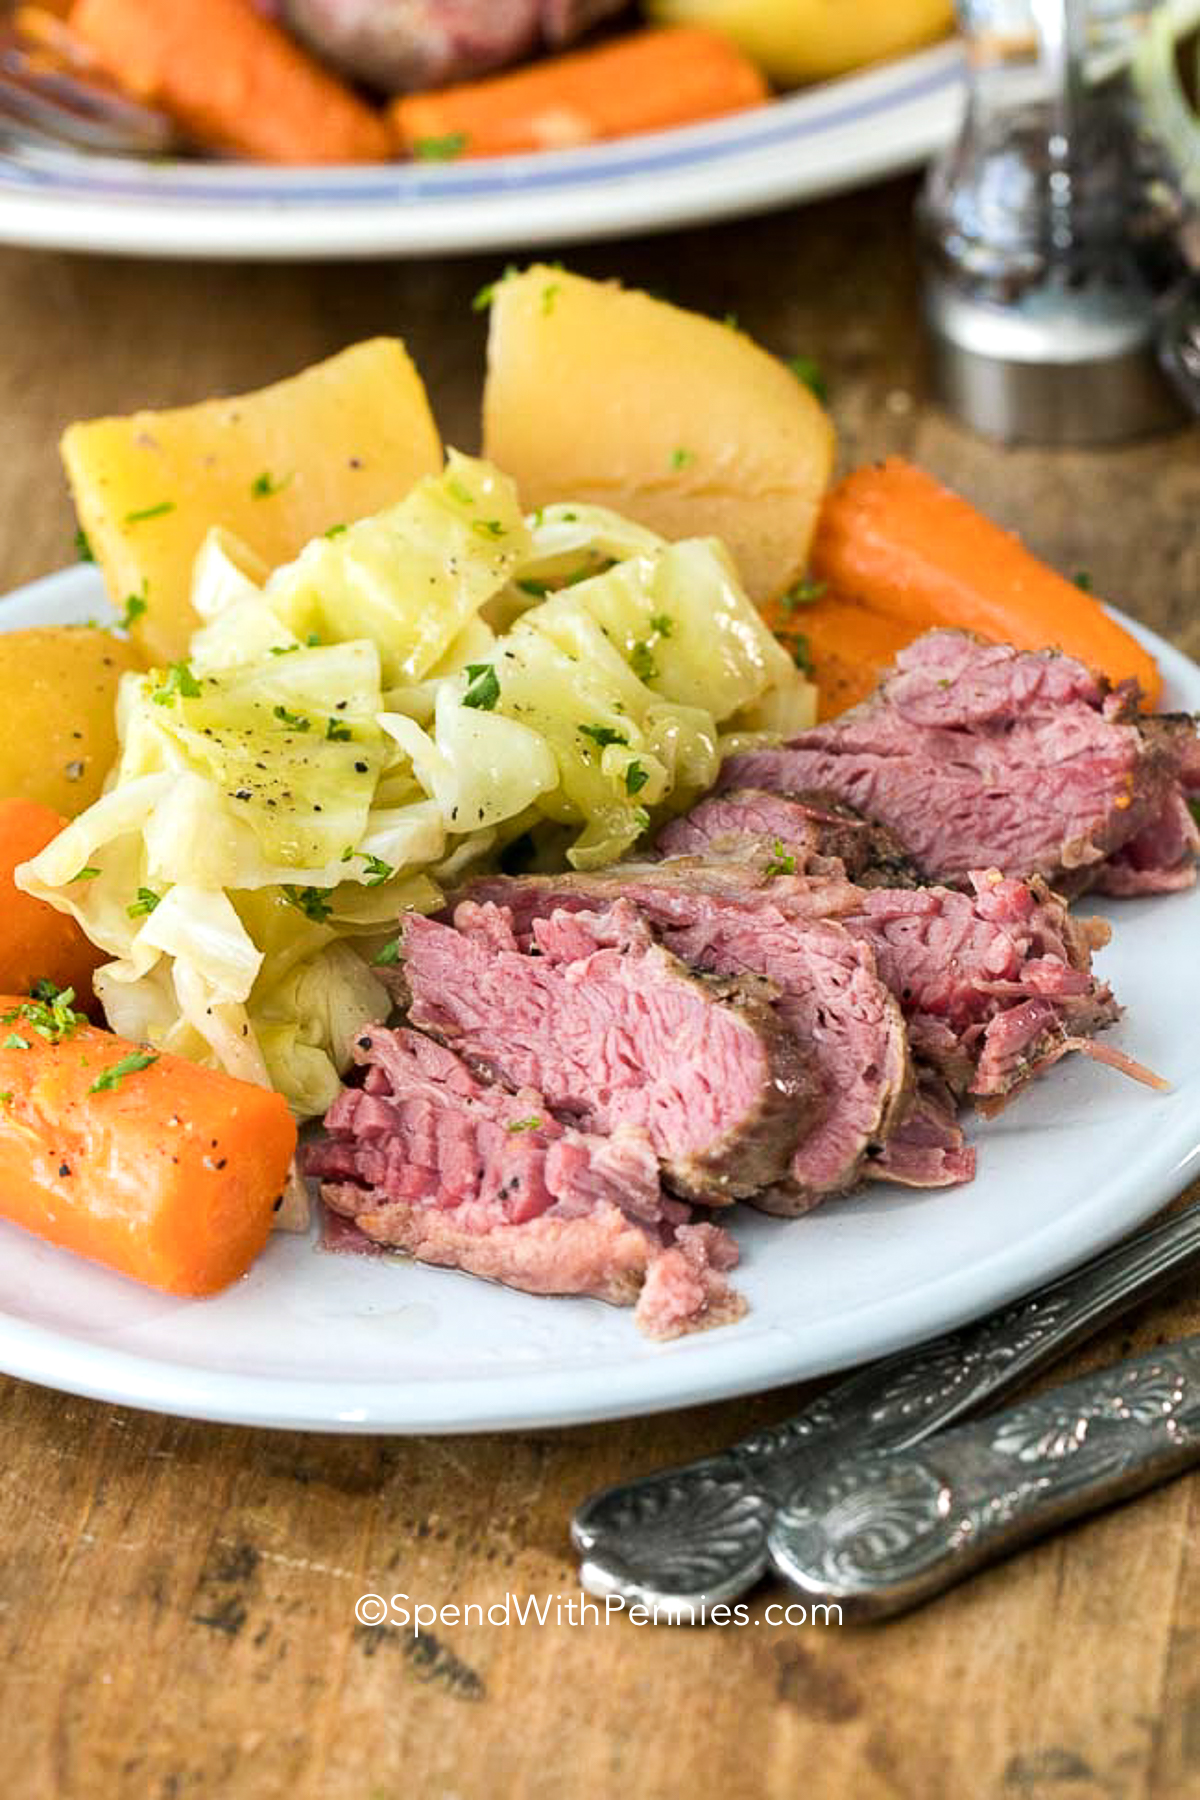 best corned beef and cabbage recipe